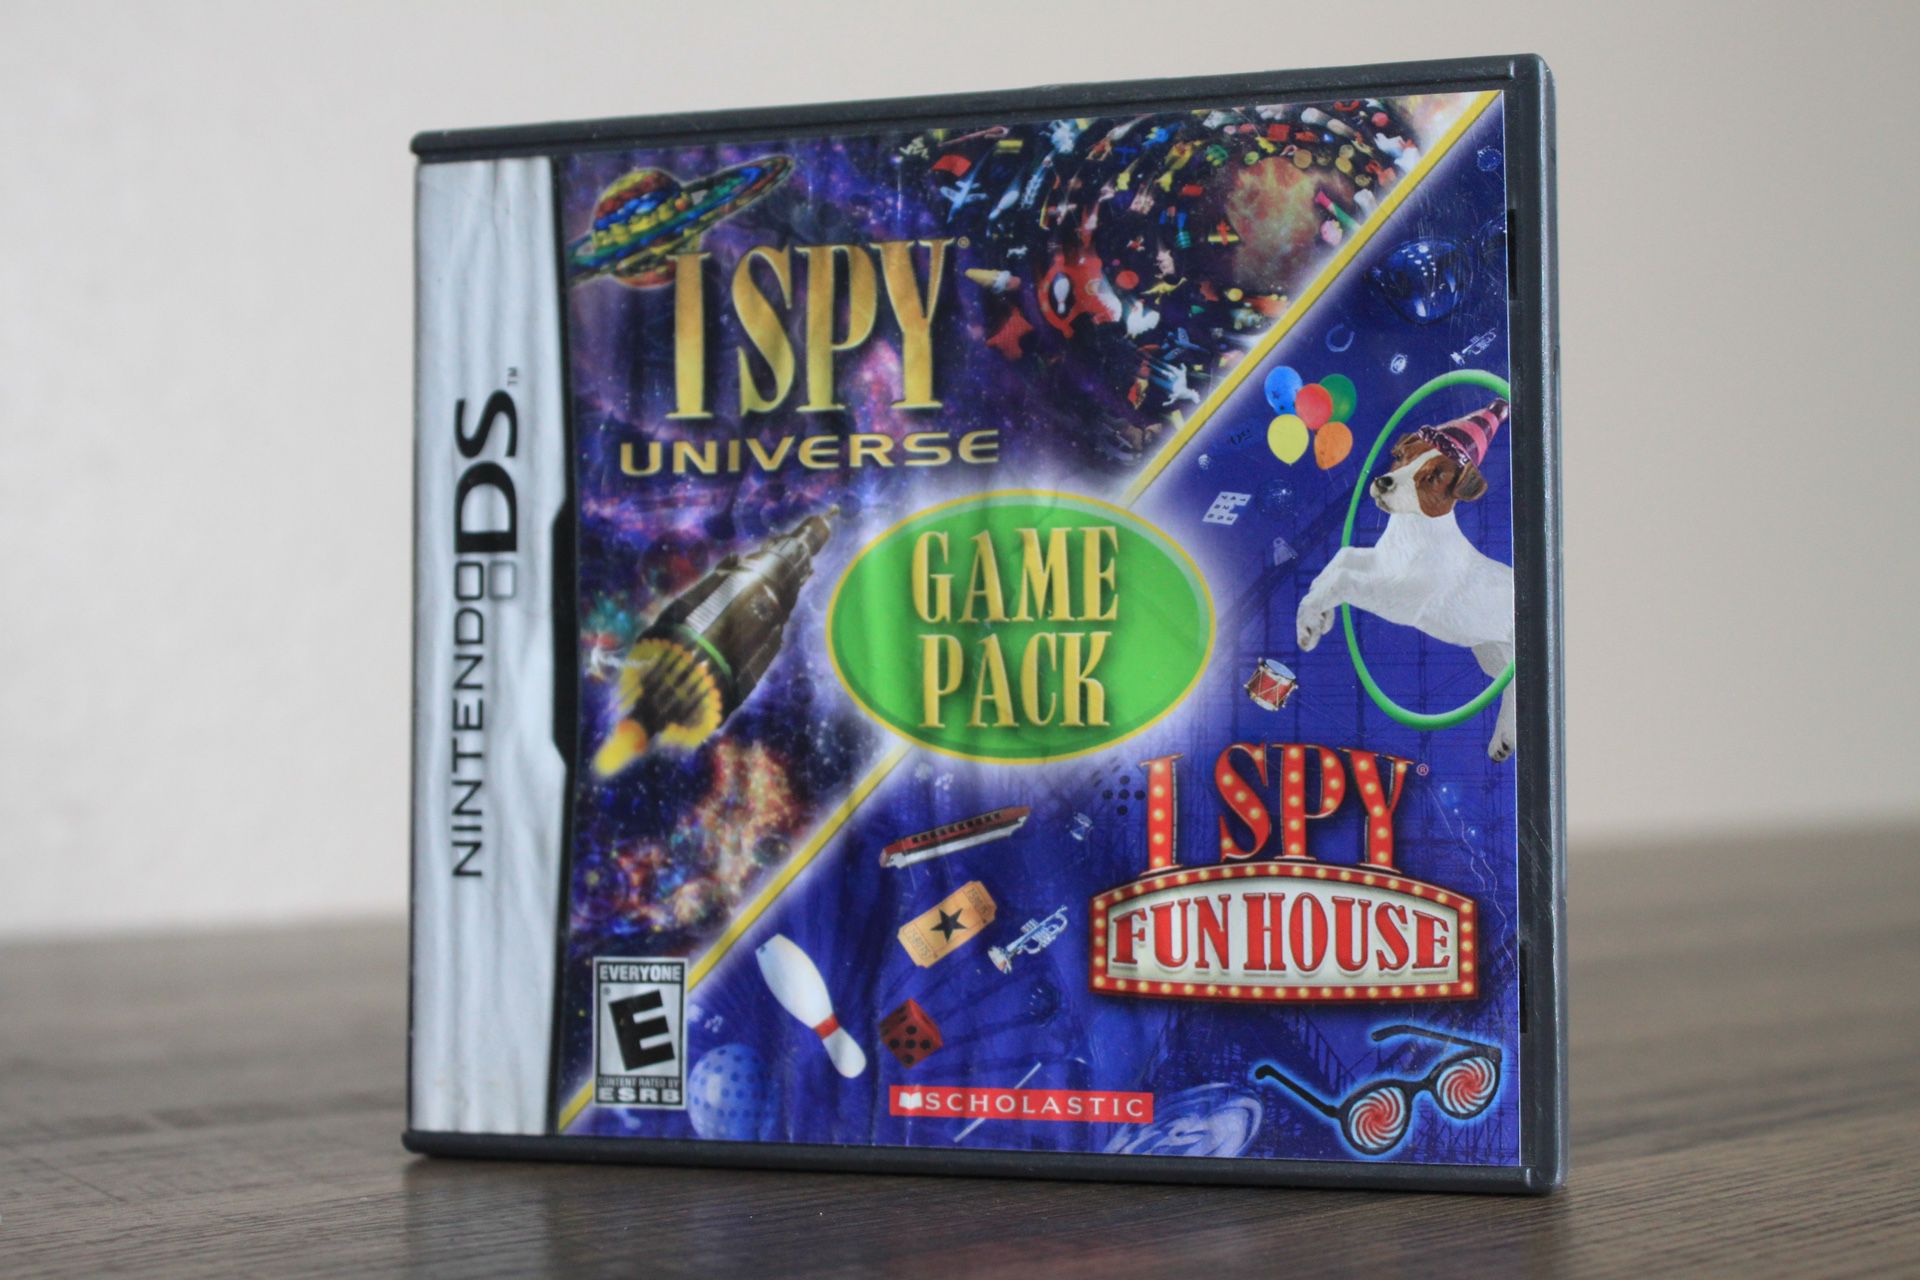 I Spy Game Pack Funhouse And Universe Nintendo DS